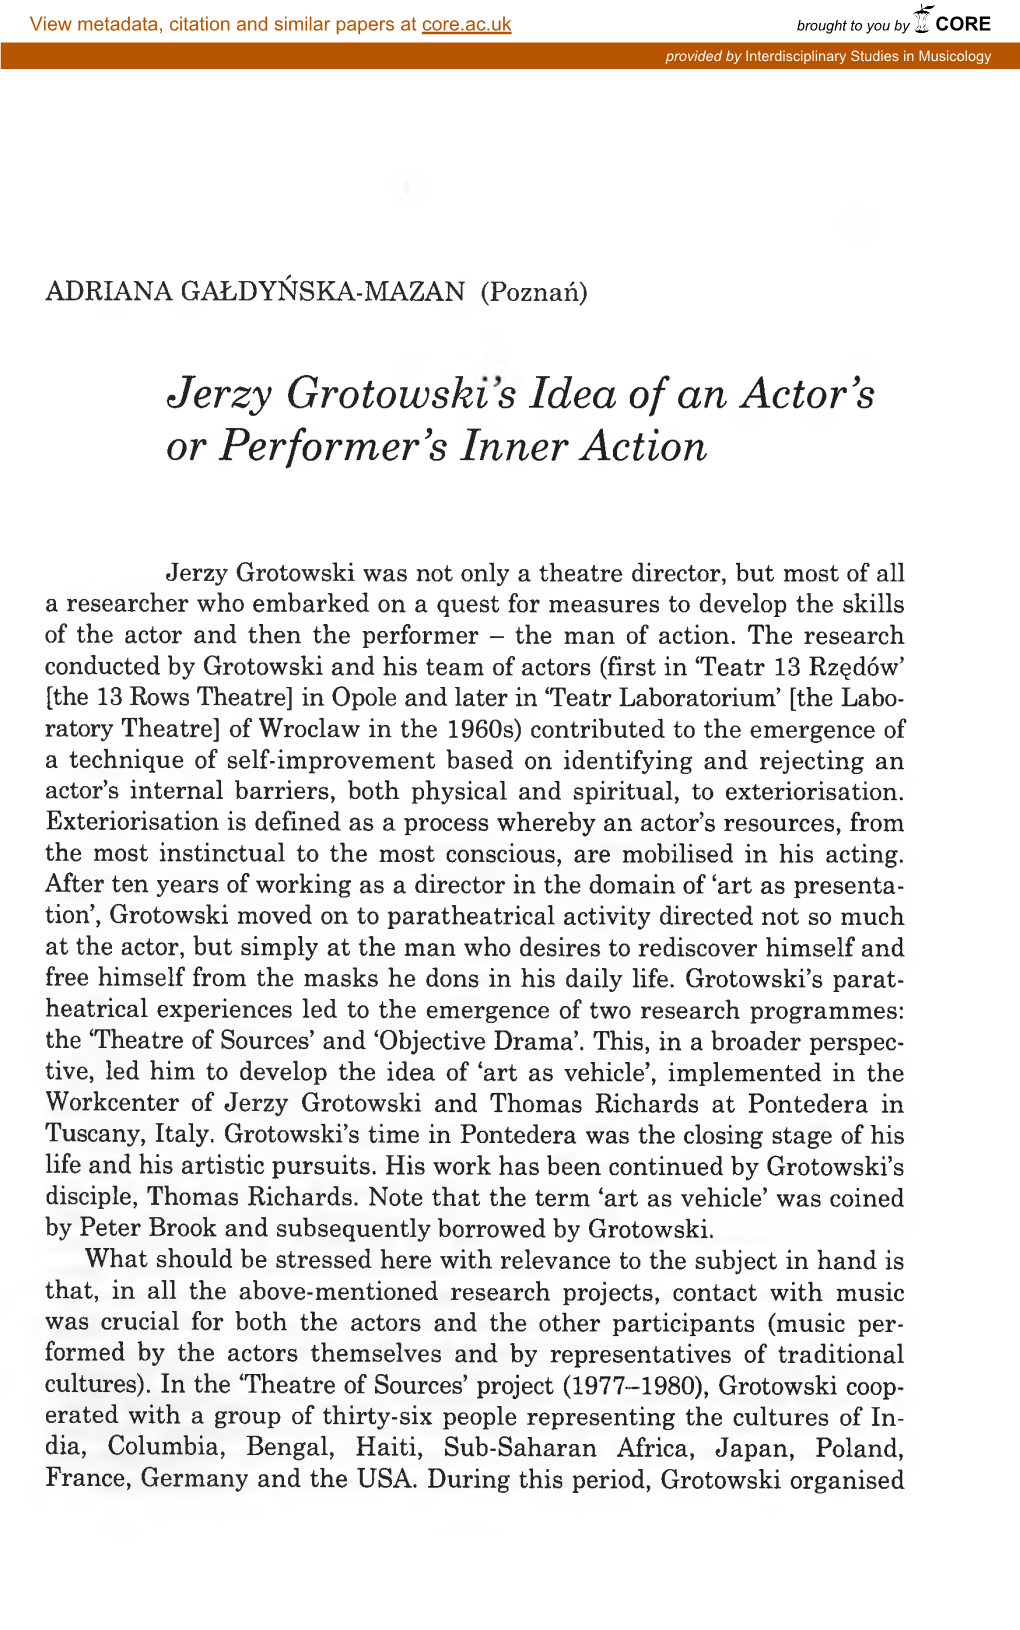 Jerzy Grotowski S Idea of an Actor's Or Performer's Inner Action